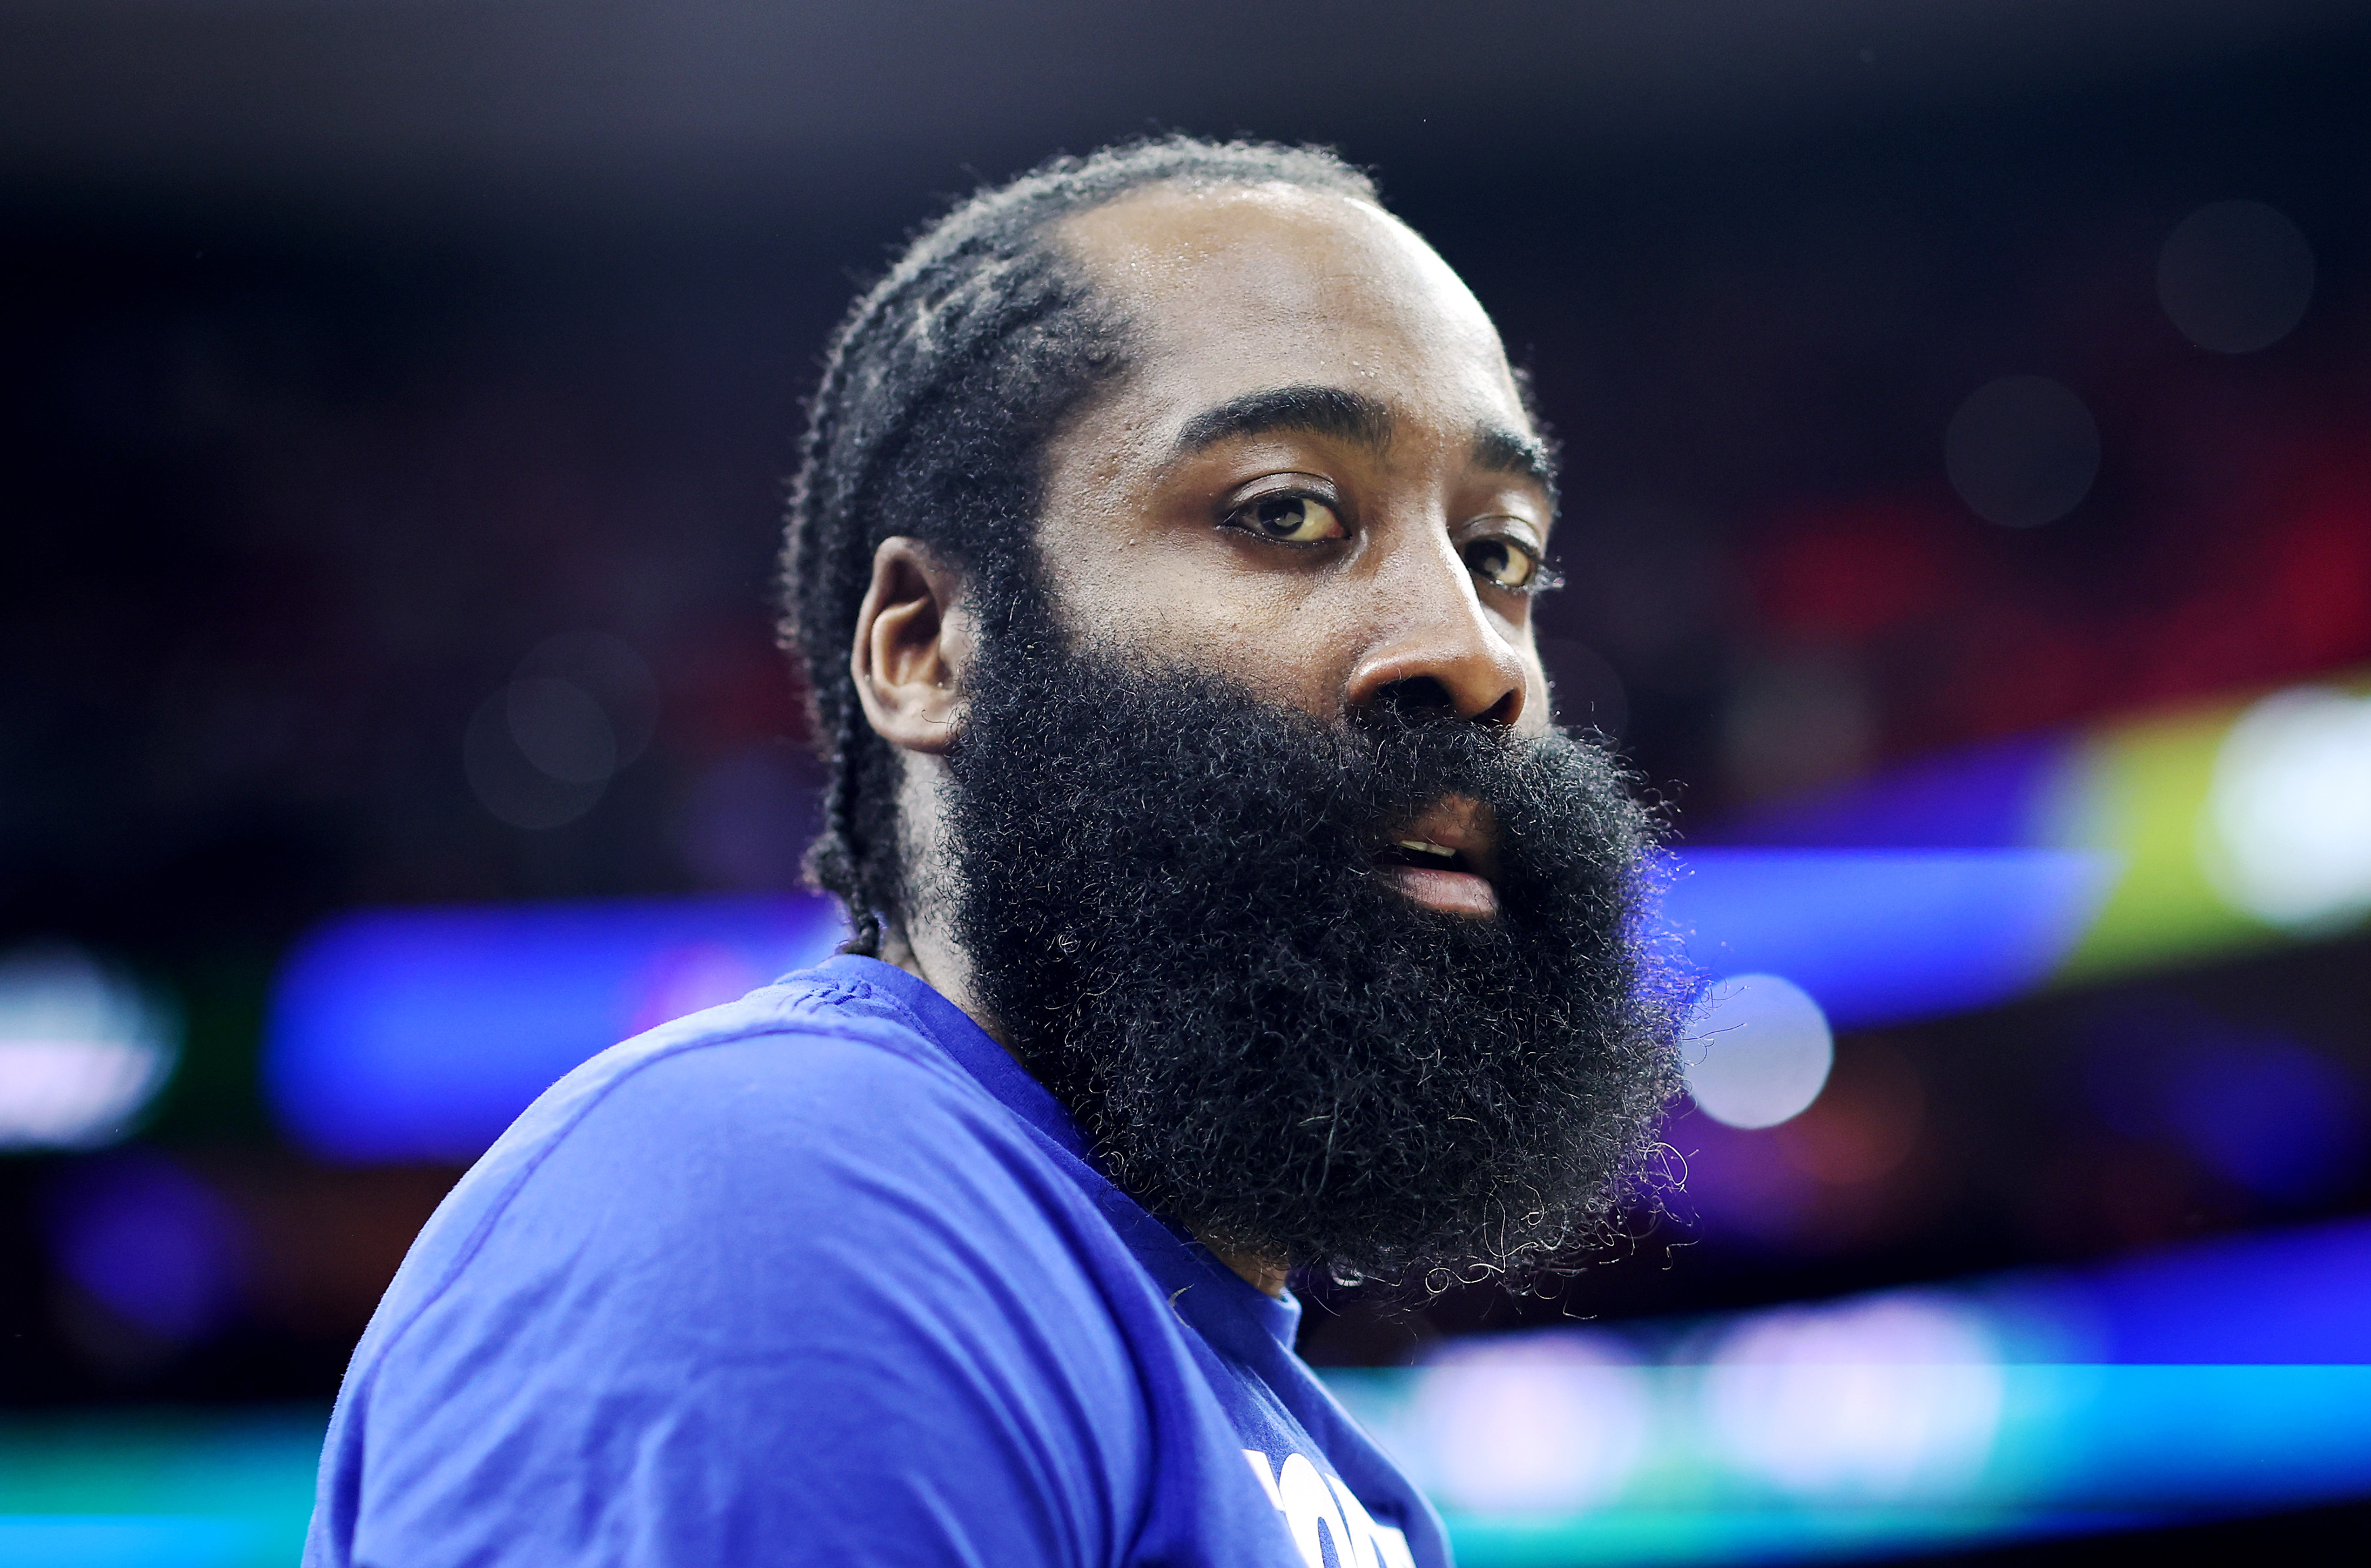 Ex-Rocket James Harden to work with 76ers on trade out of Philadelphia